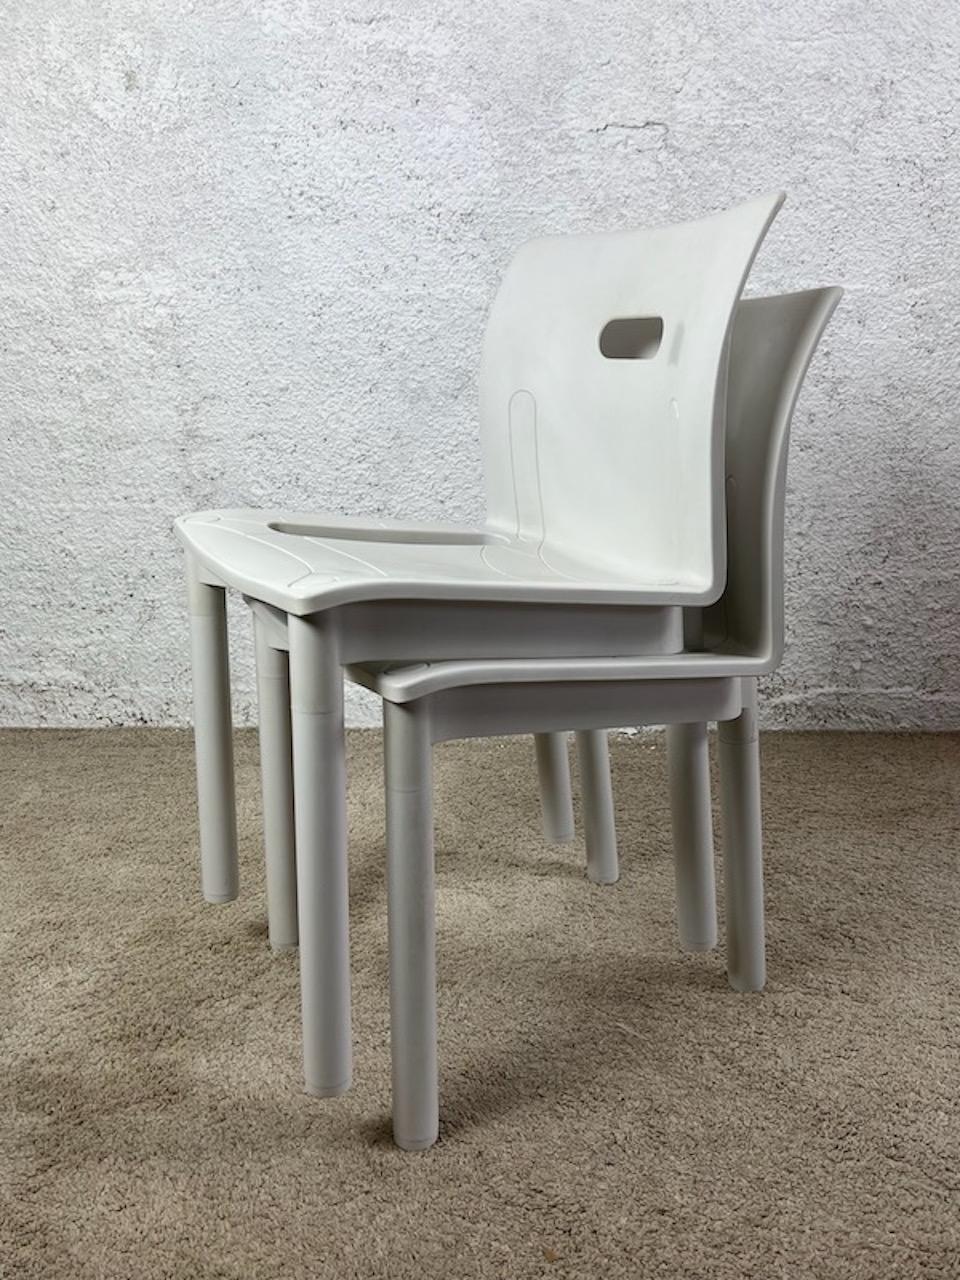 Plastic Kartell 4870 Anna Castelli  Award-Winning Stackable Chairs, 1980s For Sale